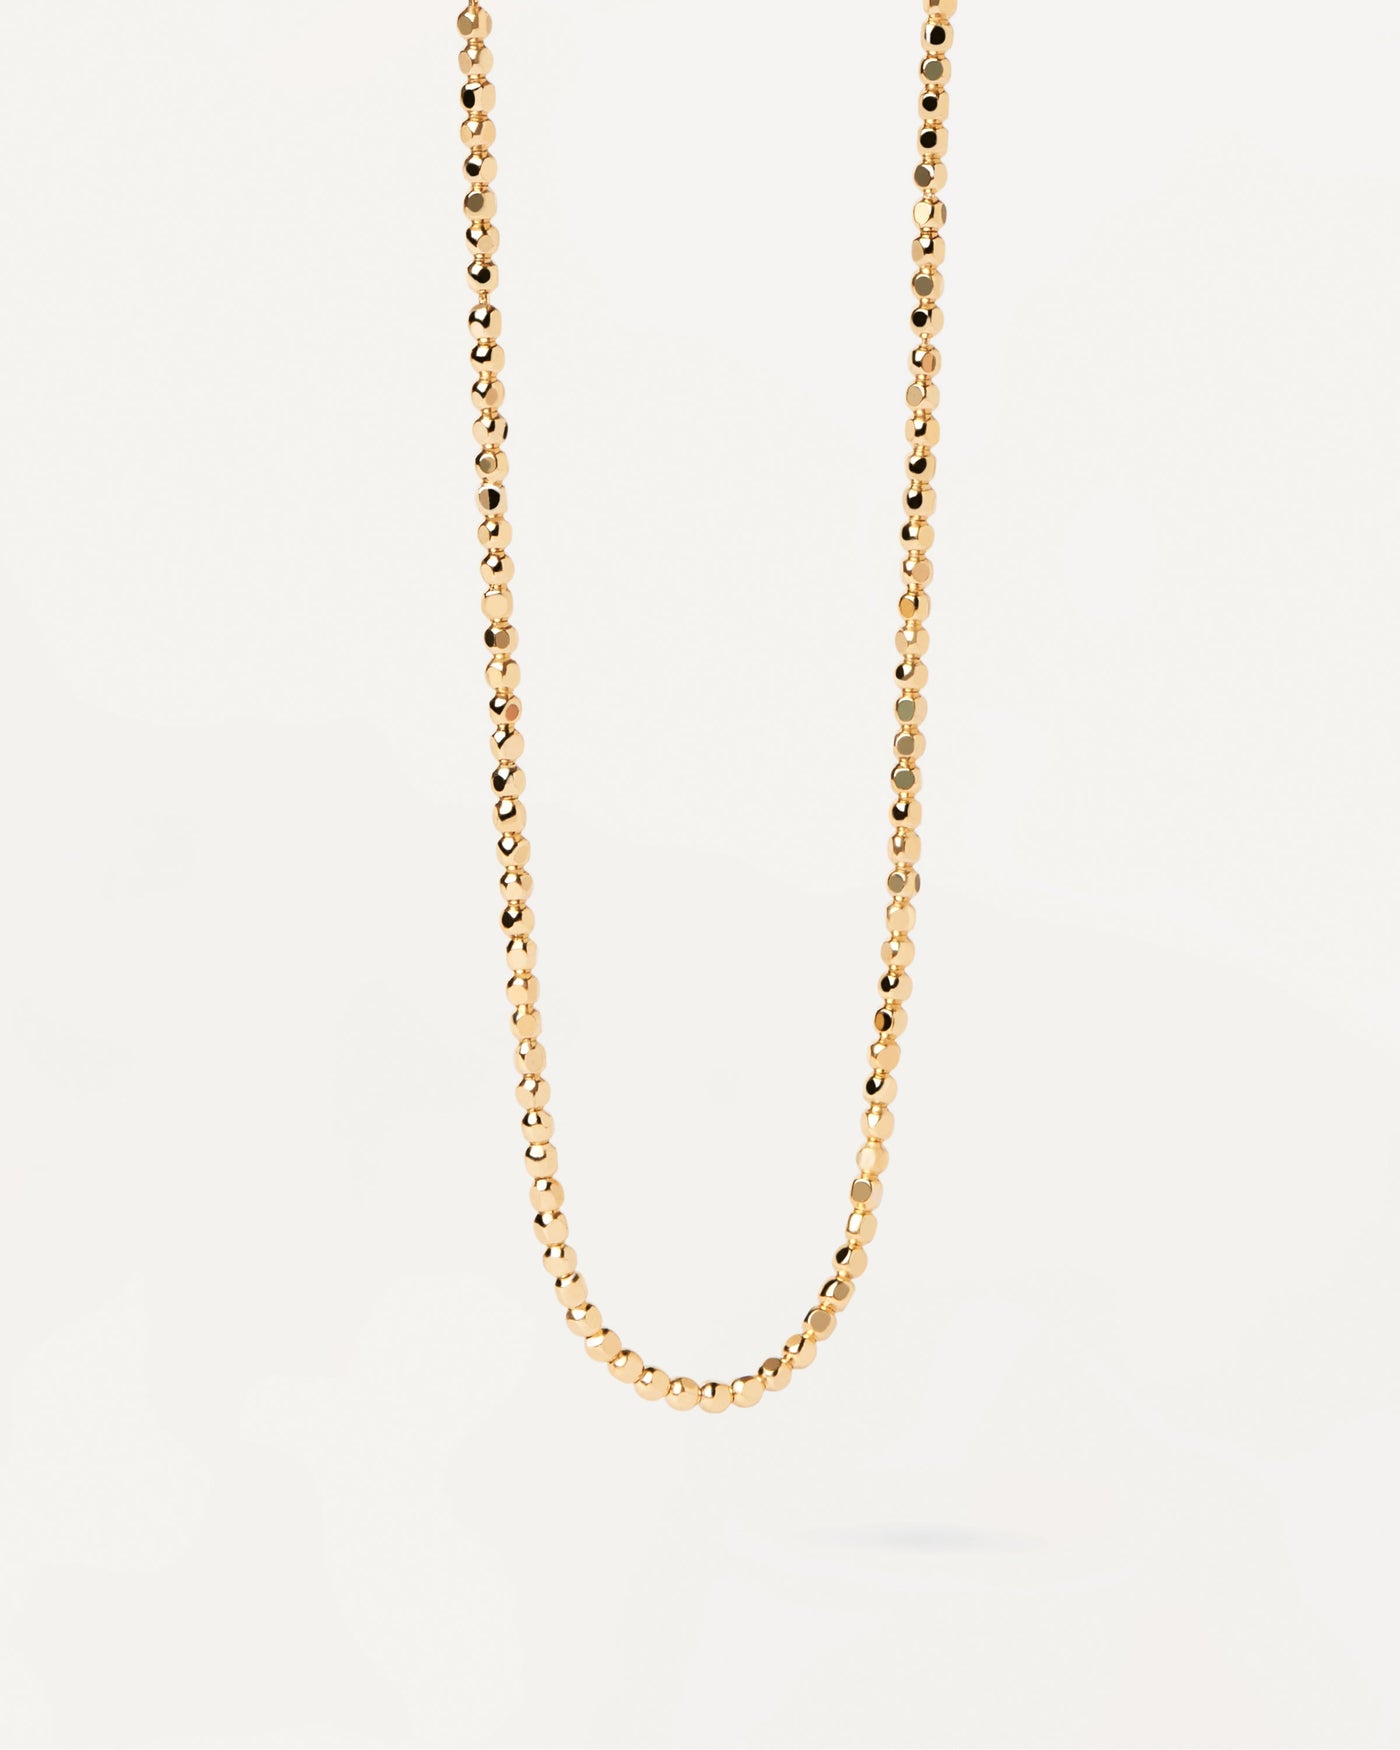 2023 Selection | Marina Chain Necklace. Gold-plated silver necklace with asymetric bead links. Get the latest arrival from PDPAOLA. Place your order safely and get this Best Seller. Free Shipping.